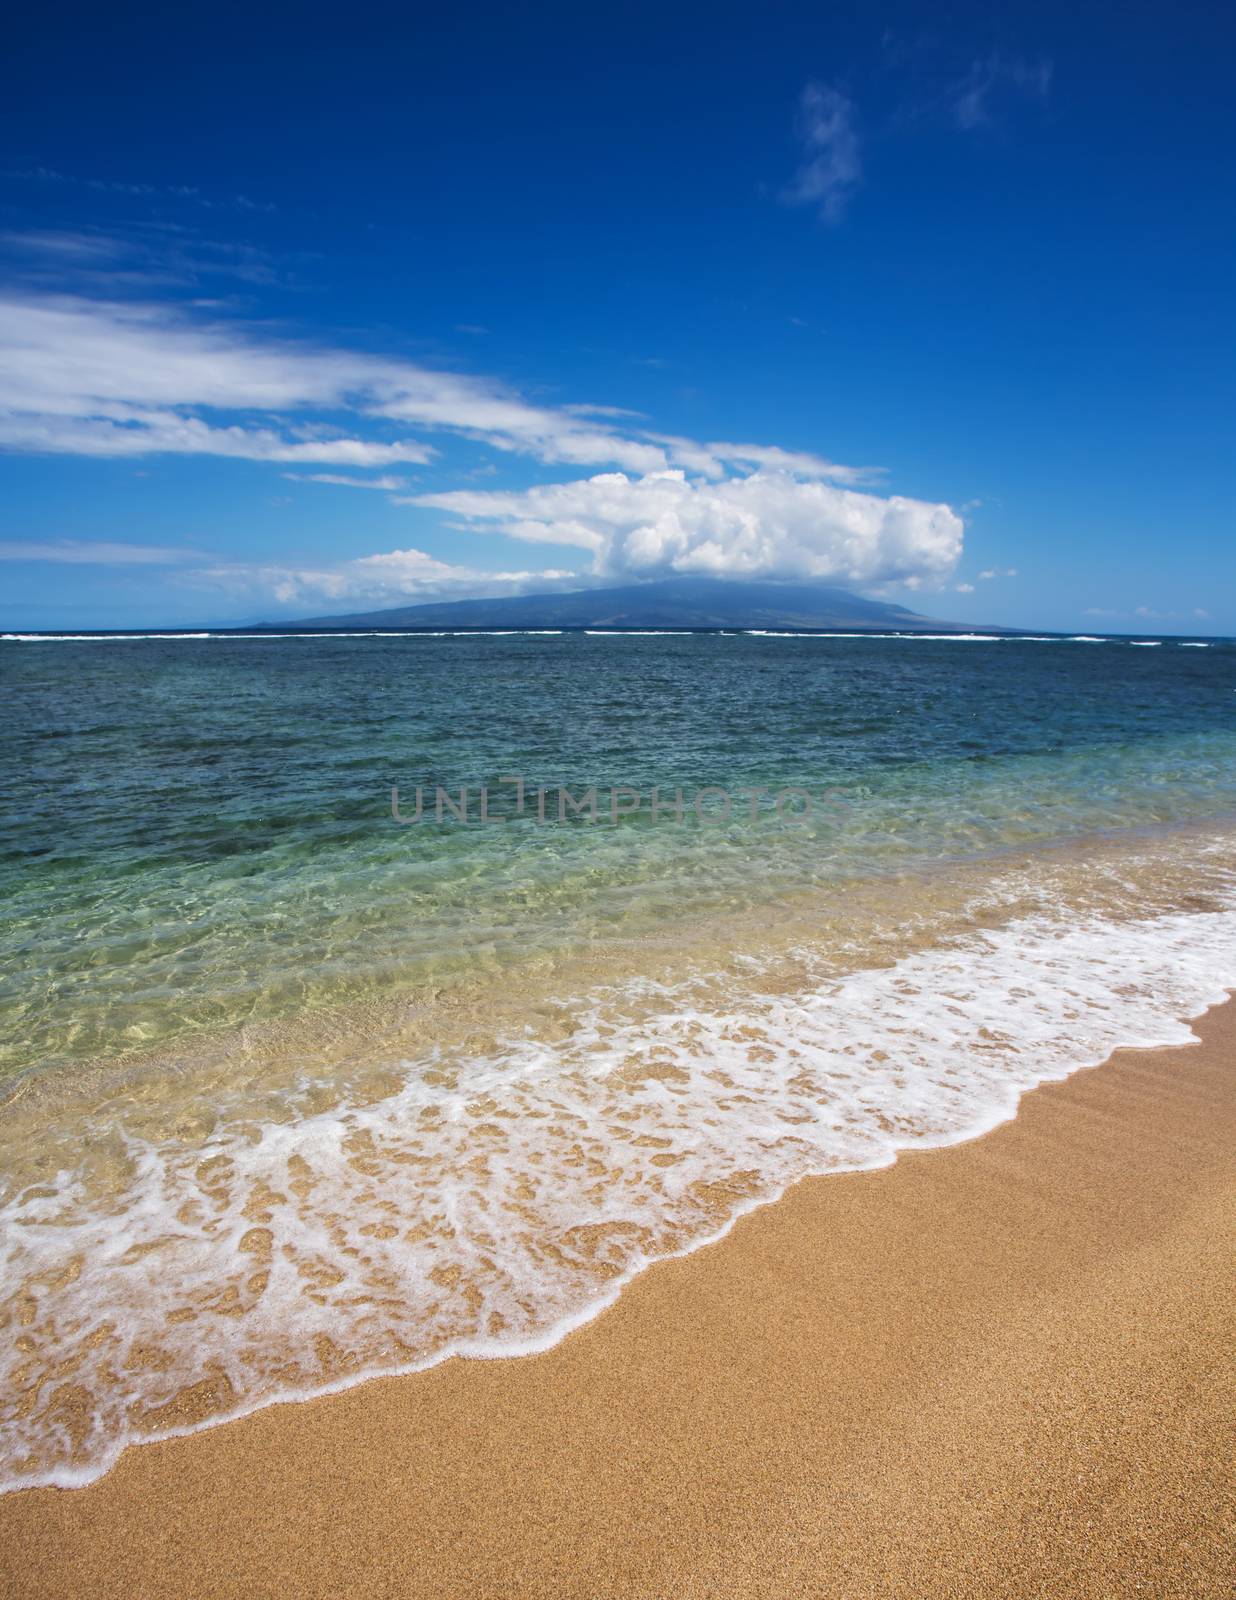 View of Maui from Molokai by Creatista